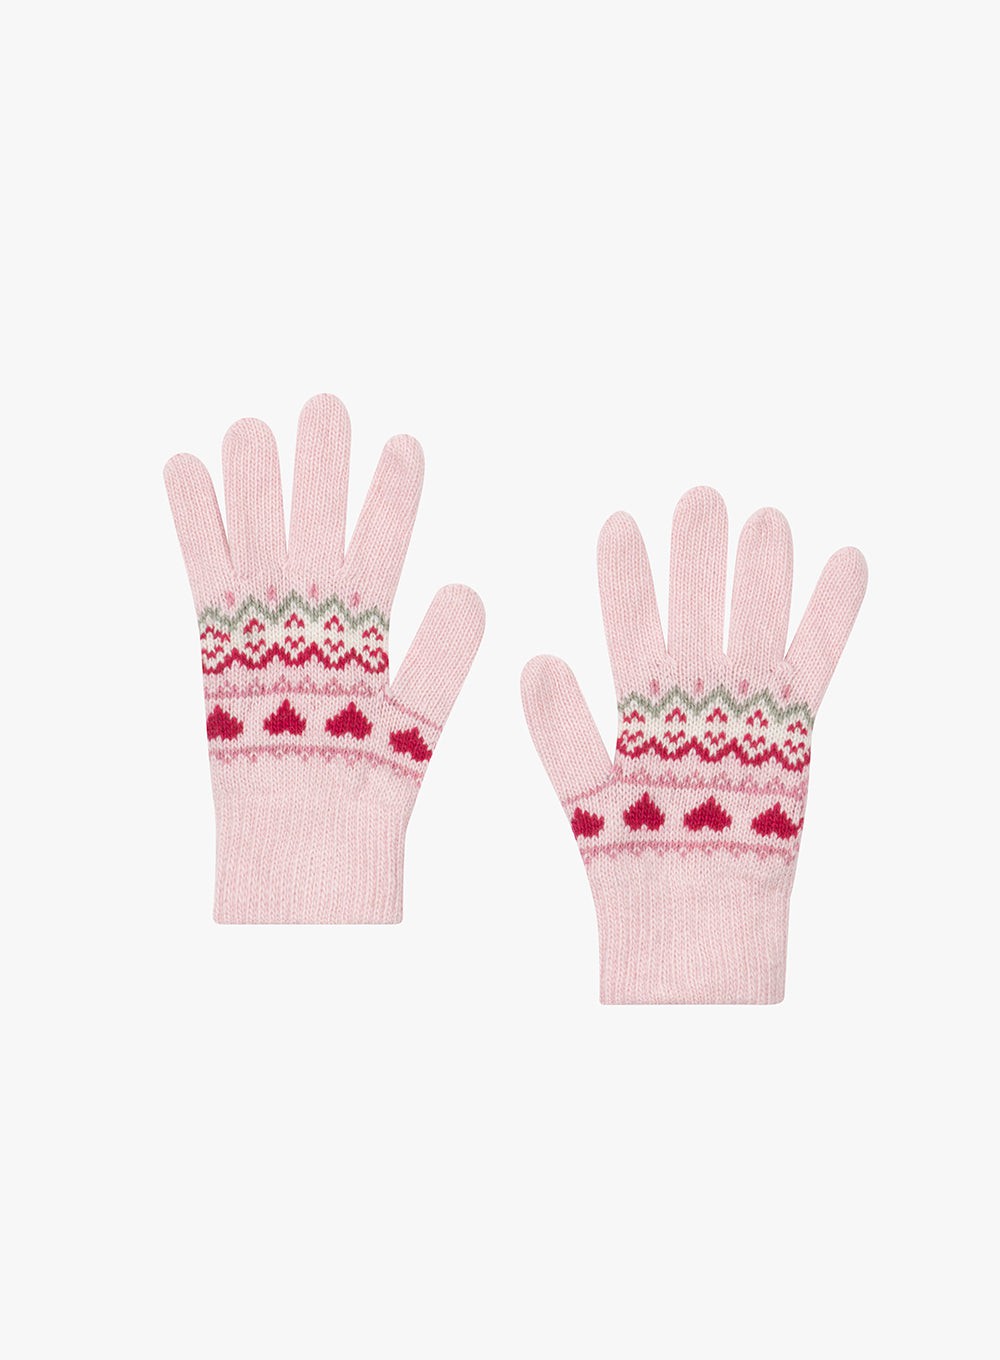 Chelsea Clothing Company Gloves Fair Isle Gloves in Pink